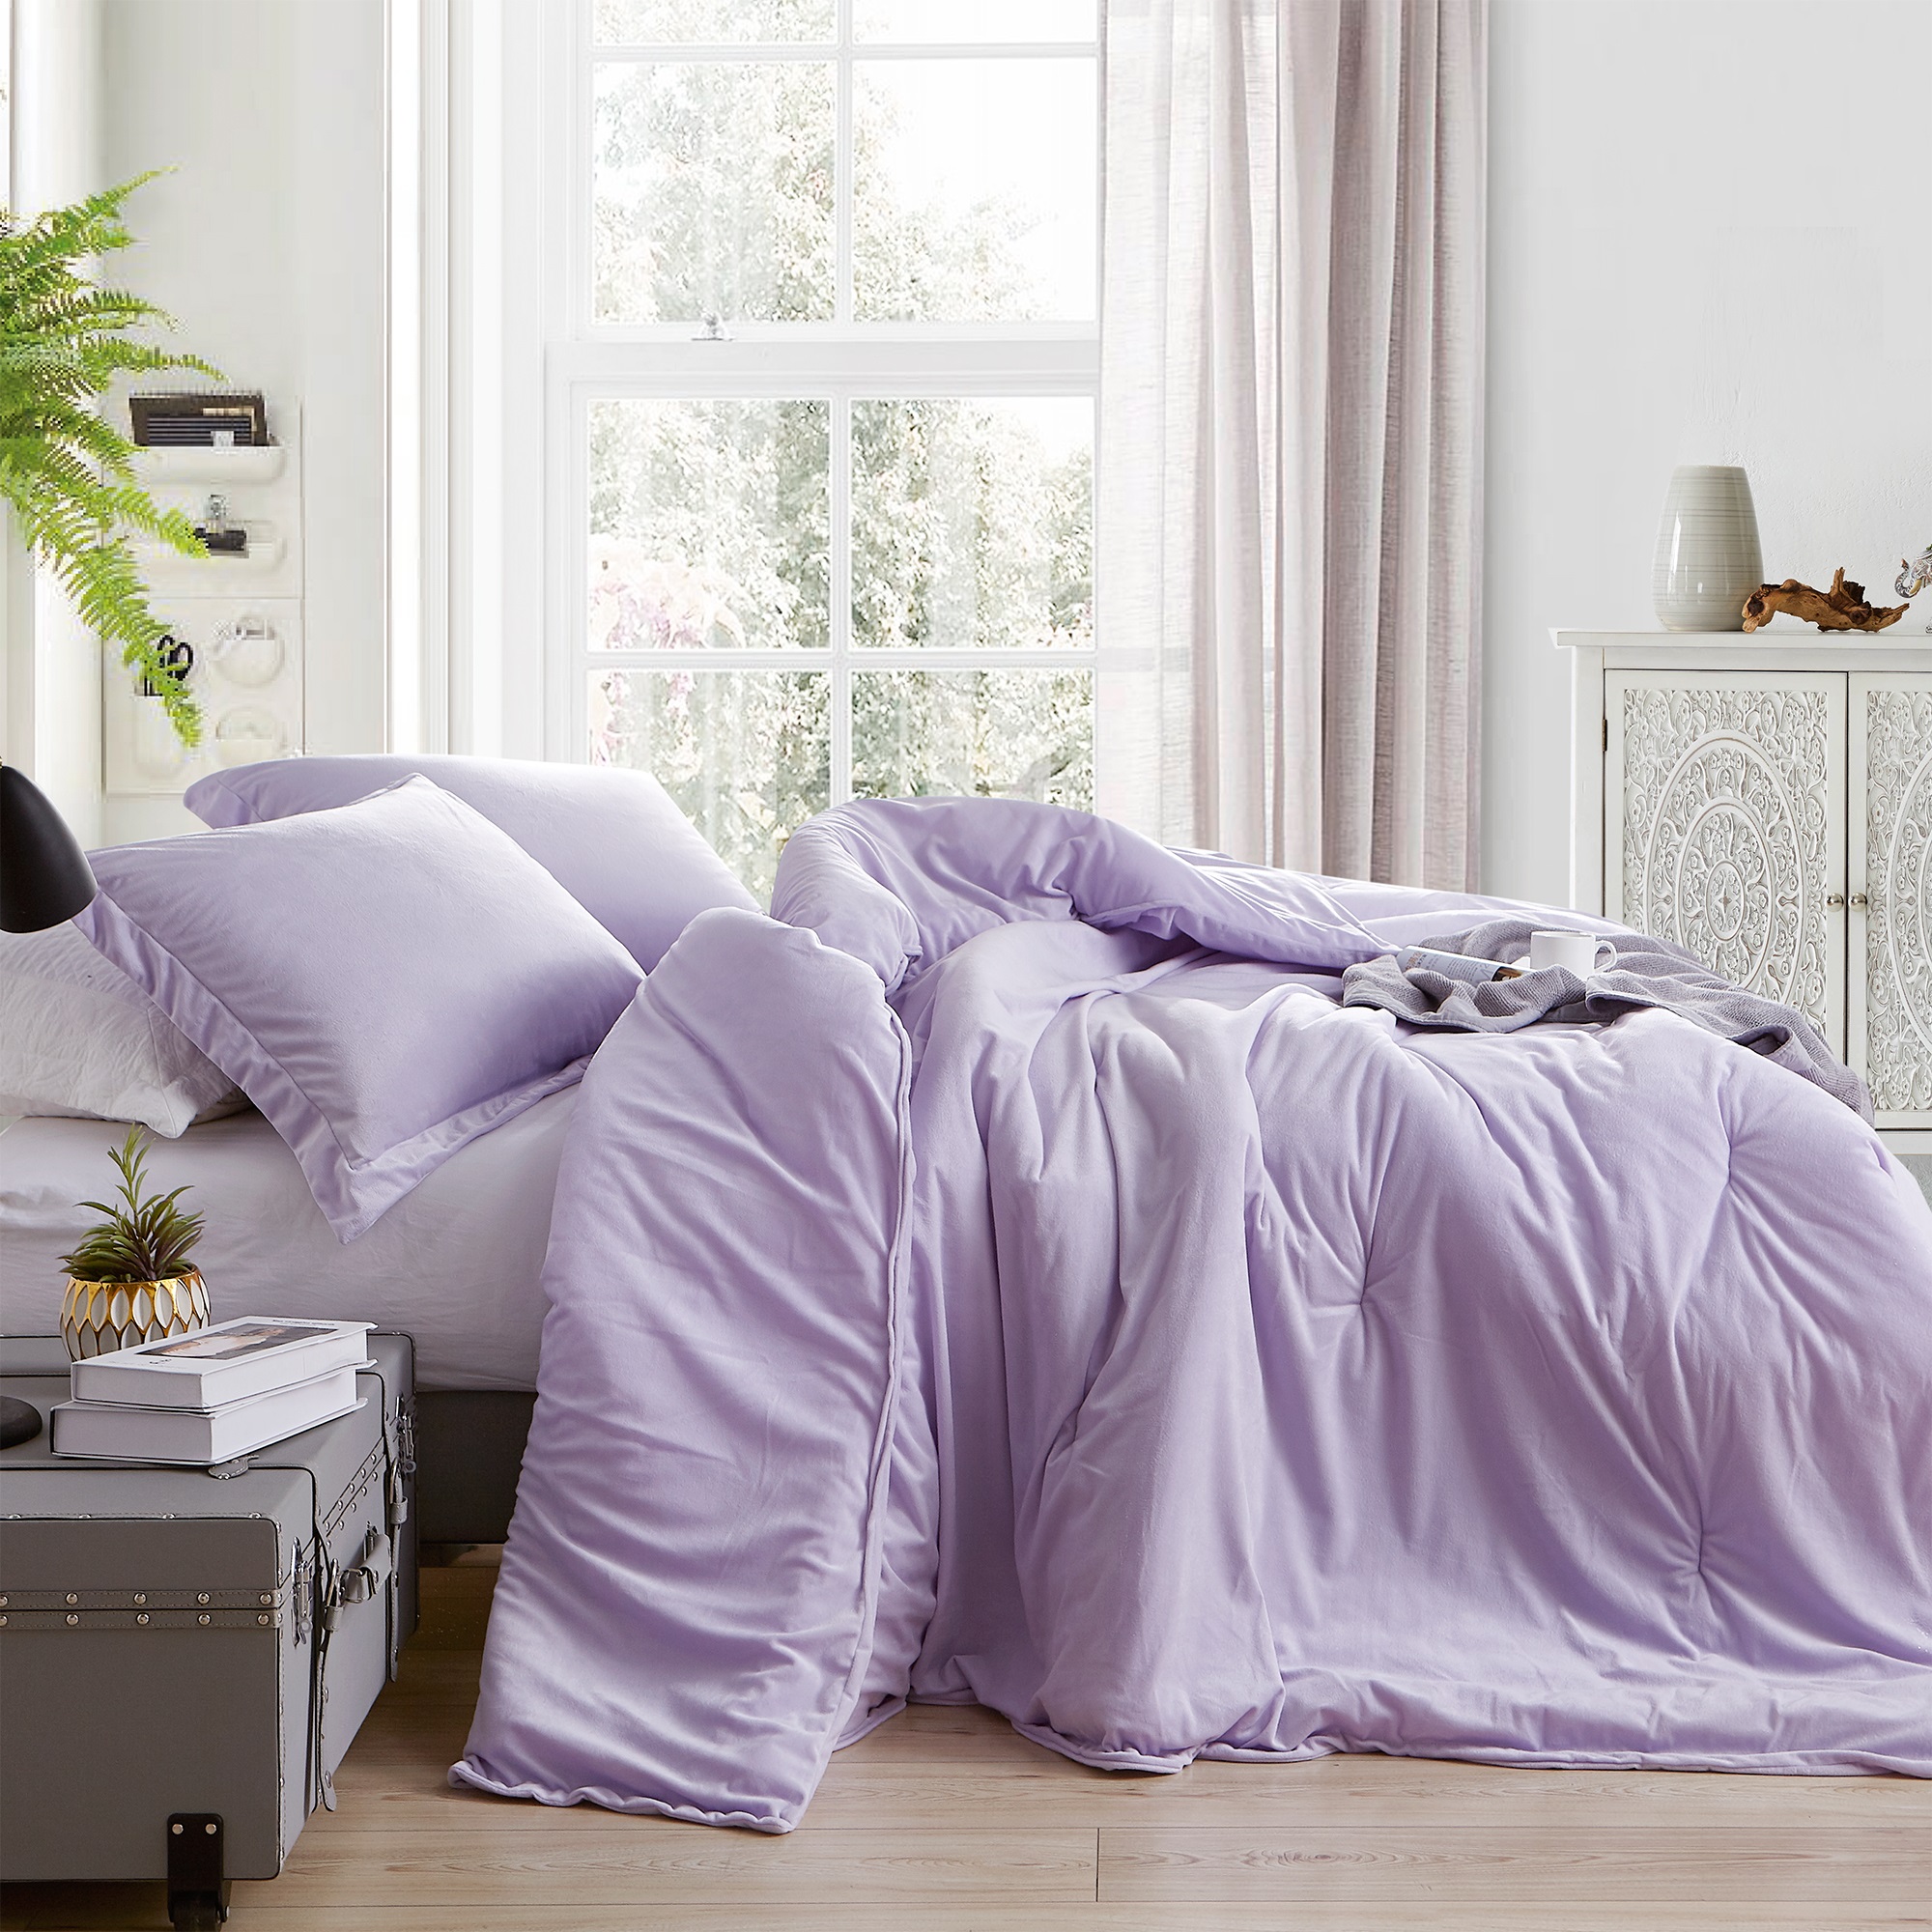 Coma Inducer?? Oversized Comforter - Baby Bird - Orchid Petal